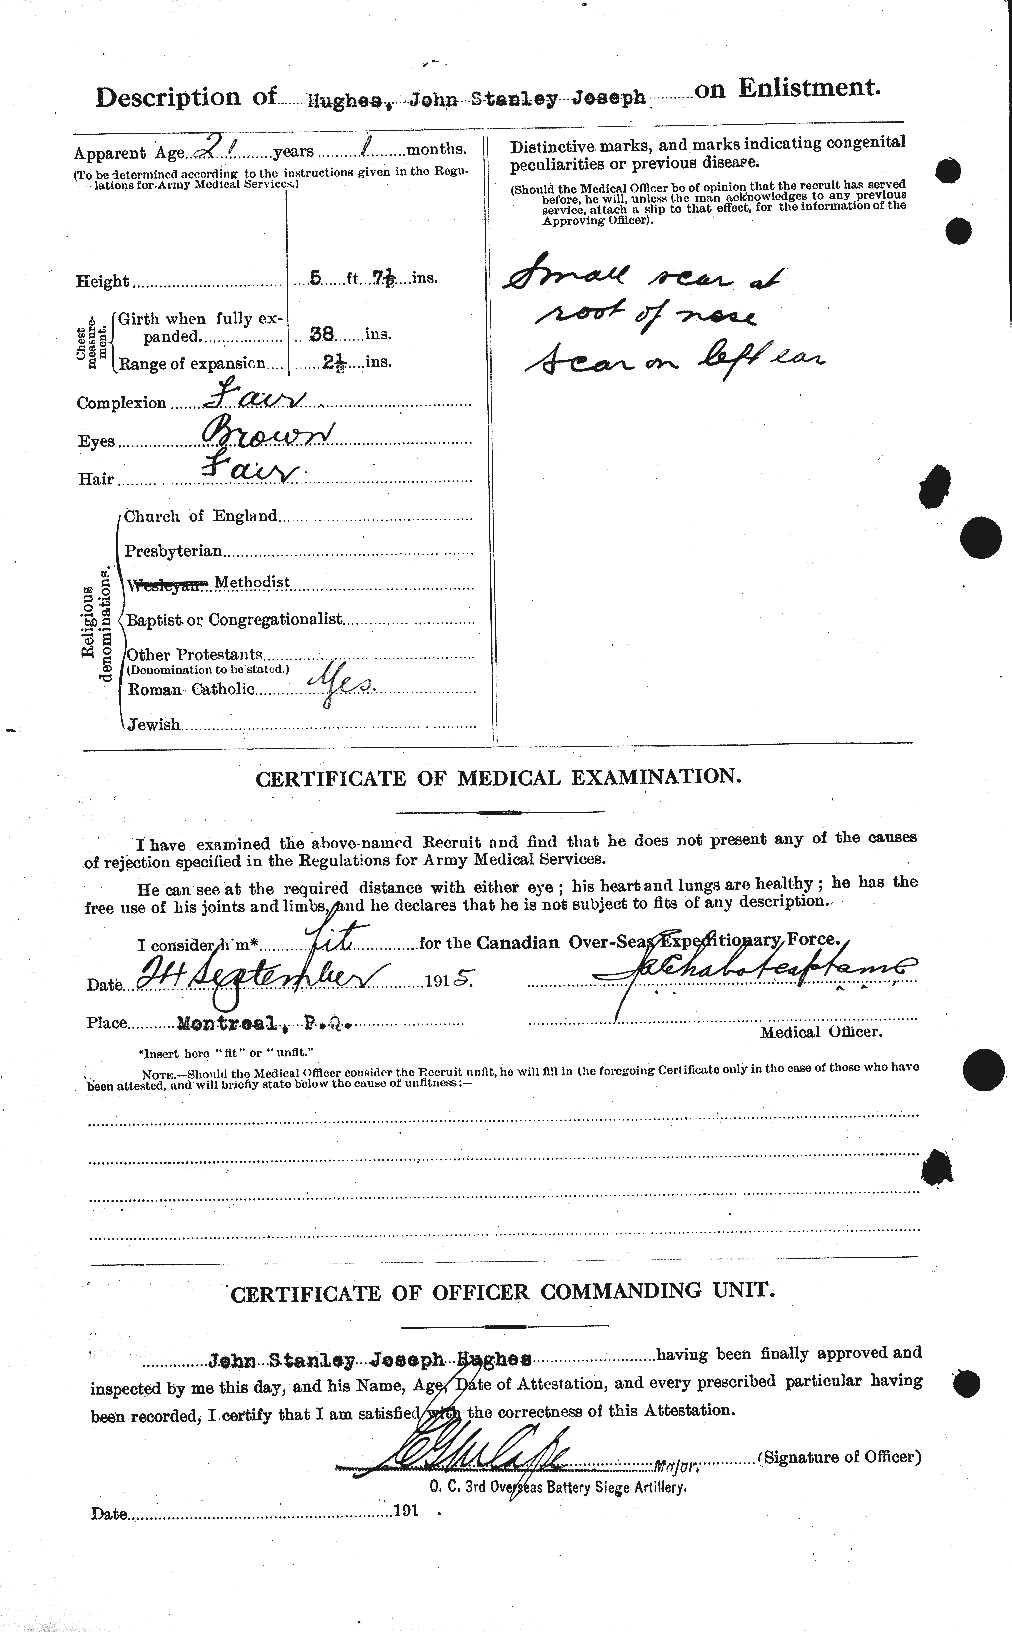 Personnel Records of the First World War - CEF 404050b